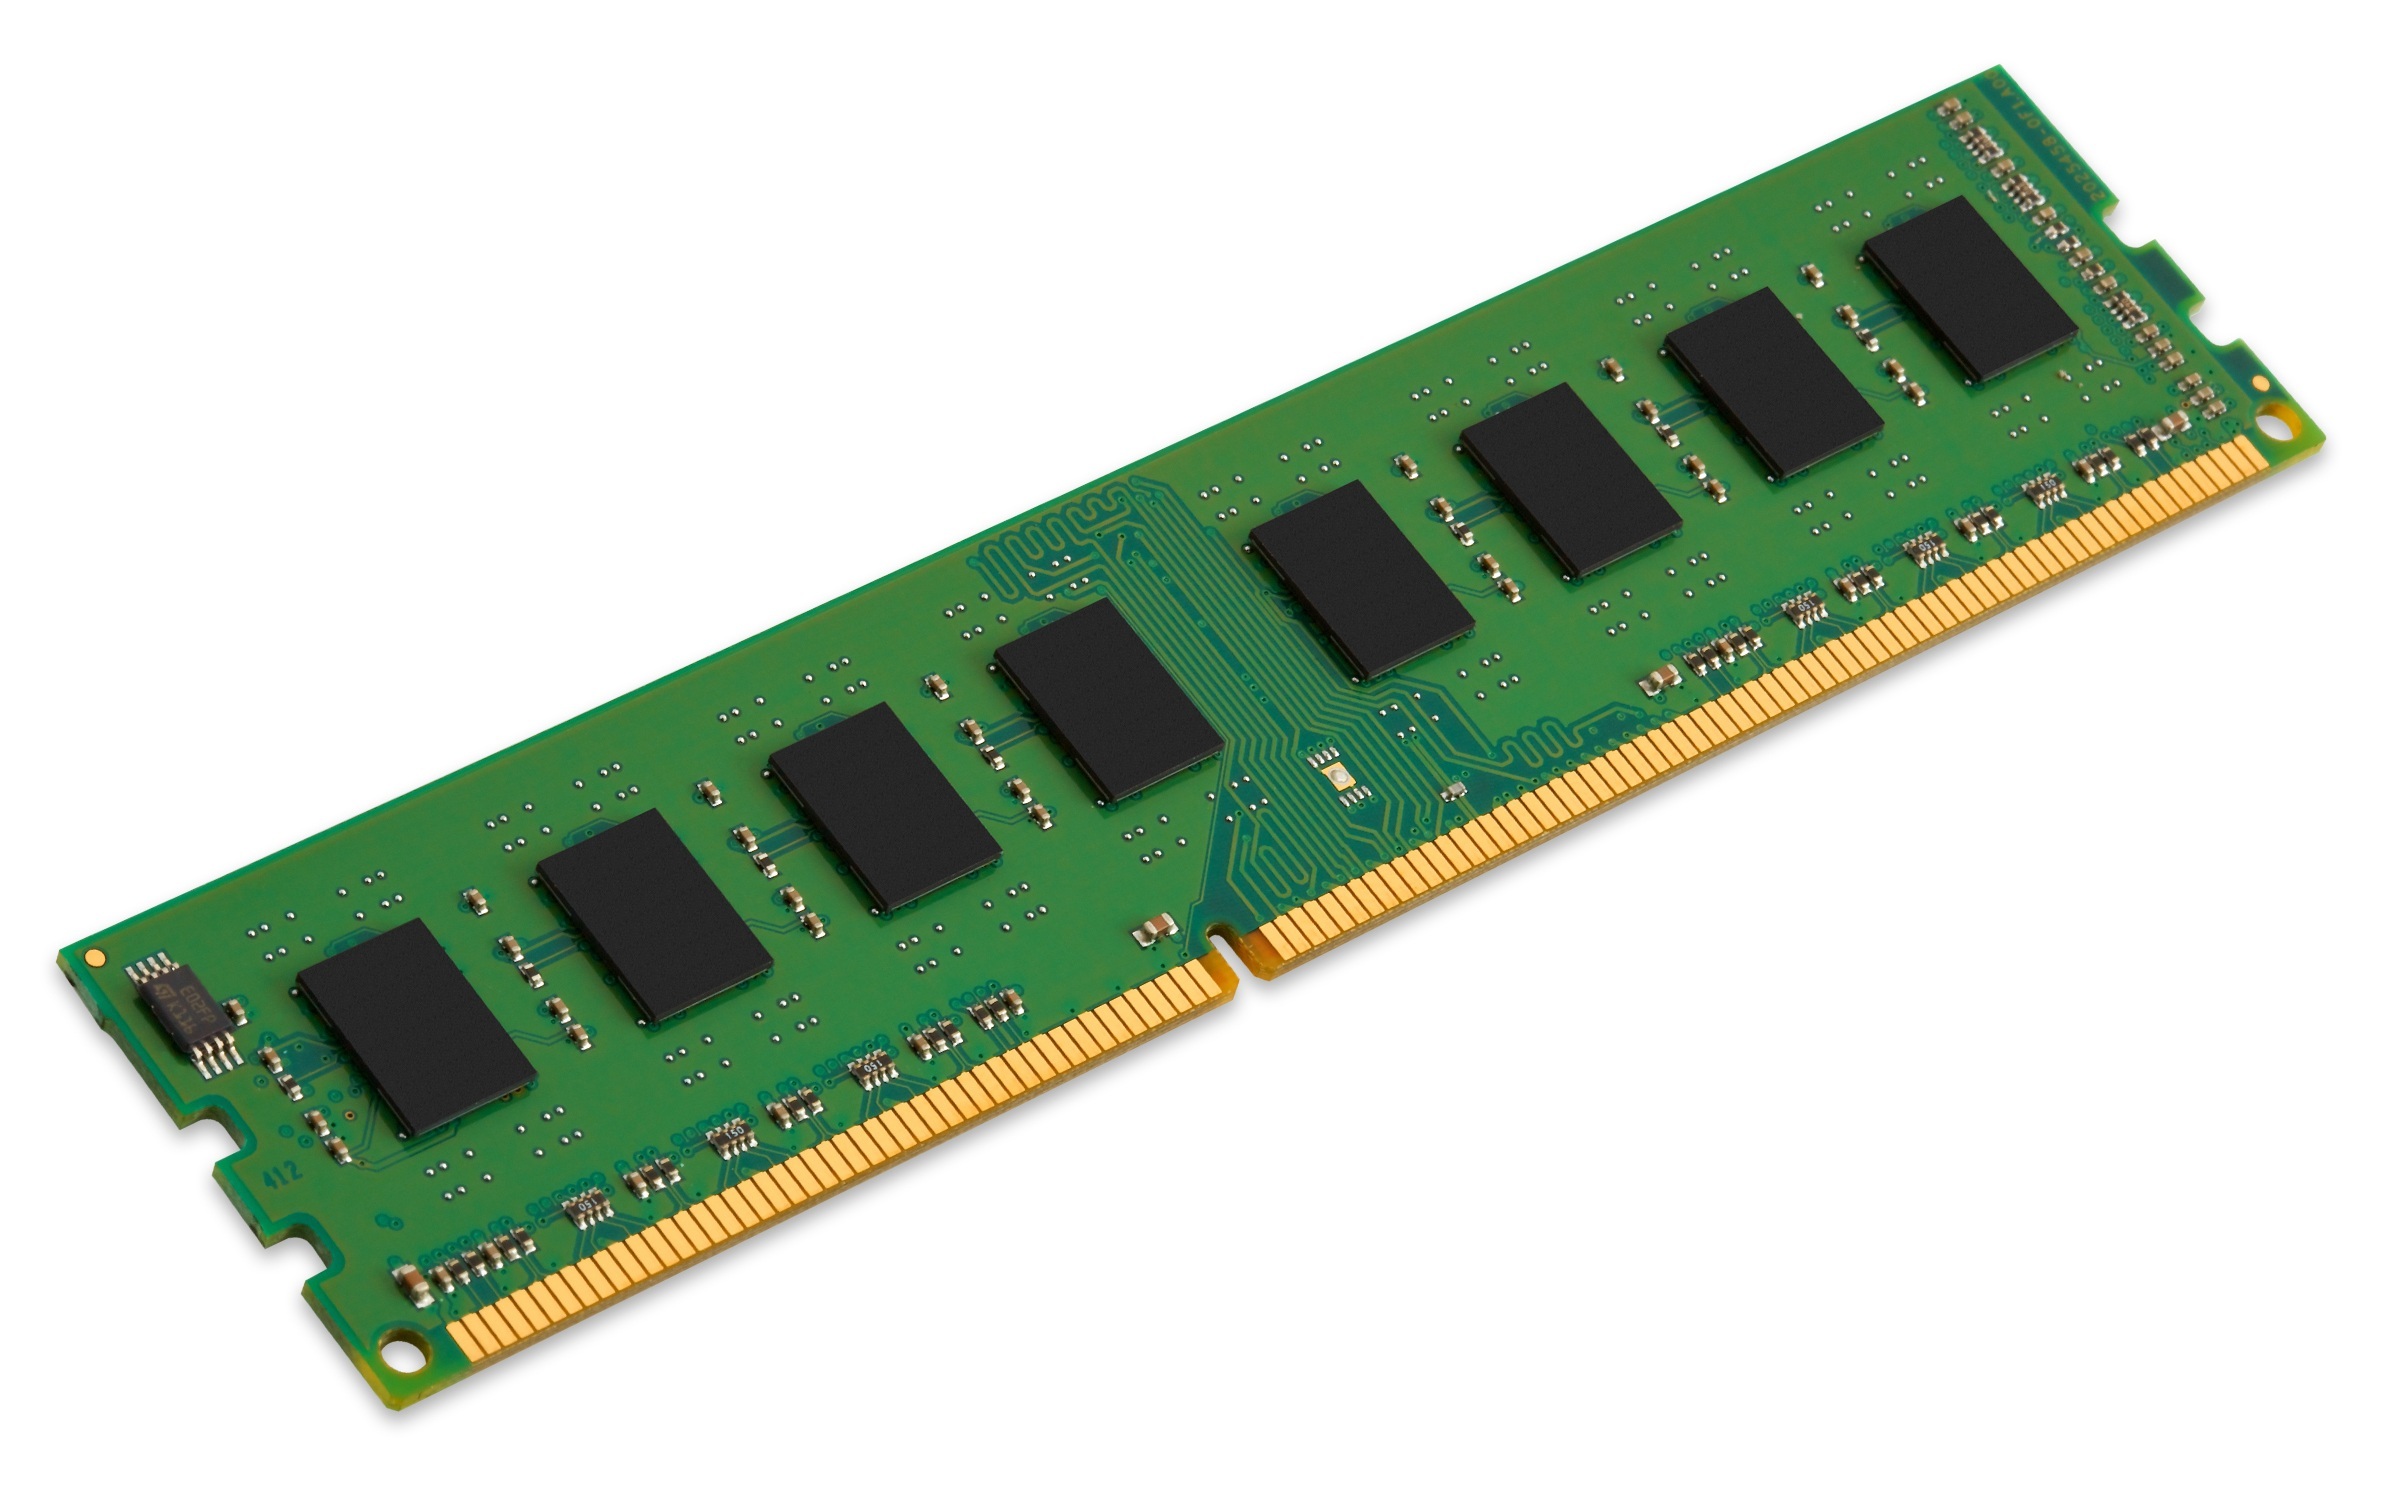 Kingston System Specific Memory 4GB DDR3 1600MHz Module